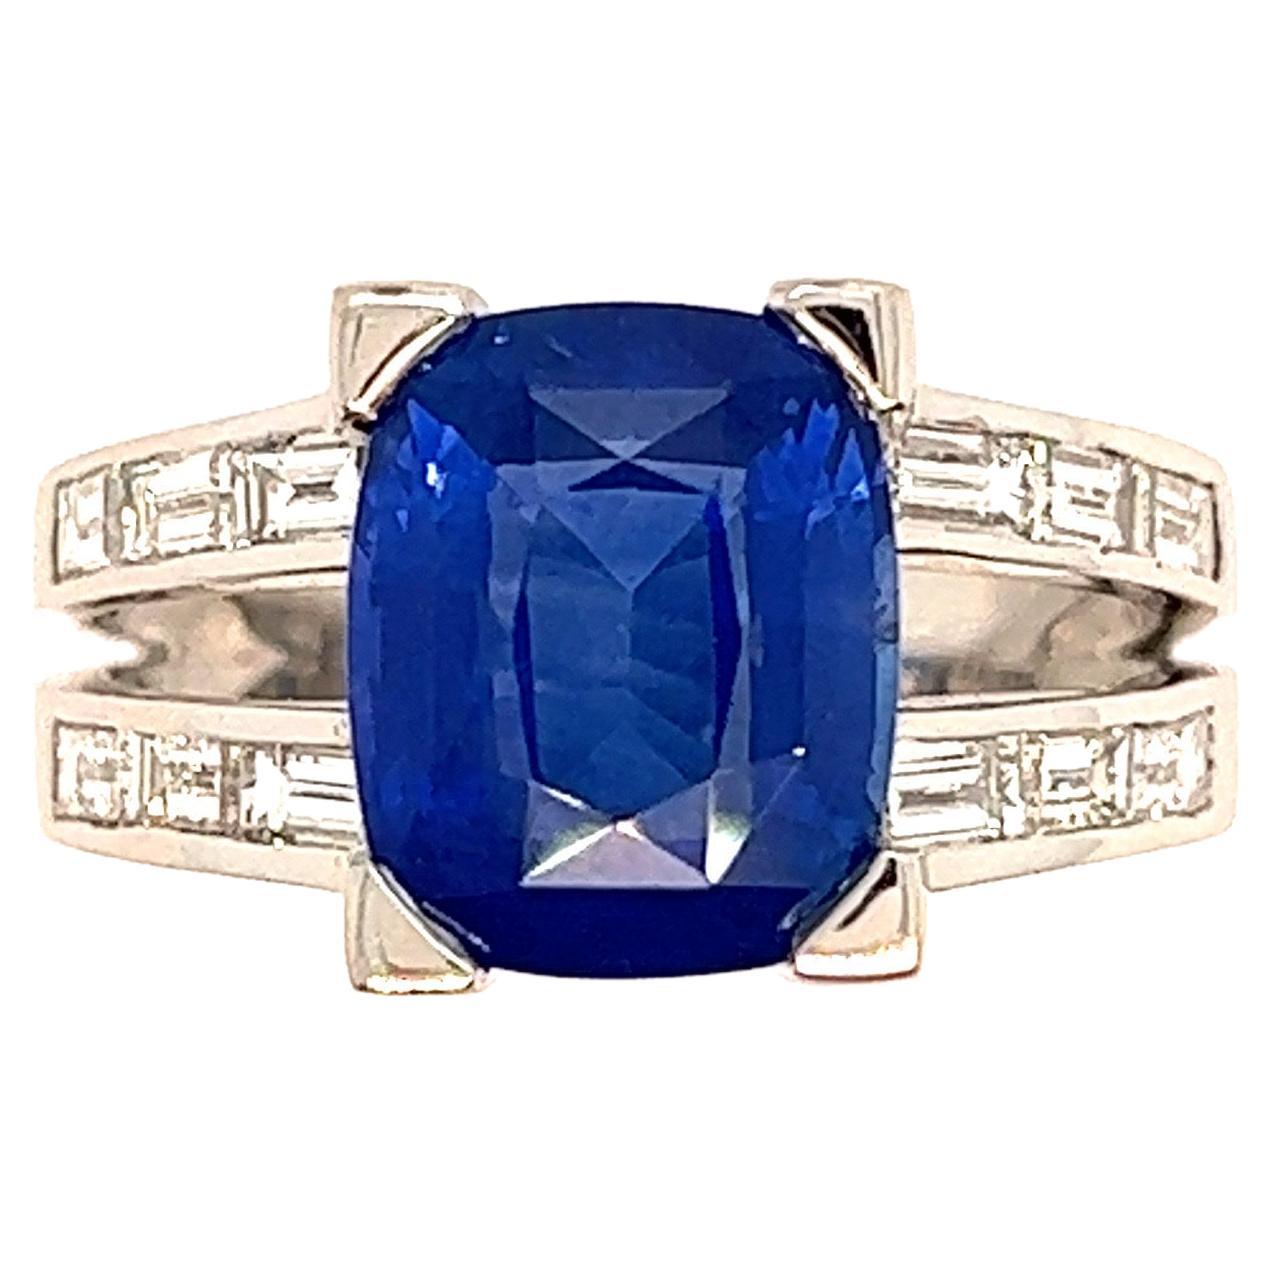 French Ring, Sapphire on Claws, Surrounded by Diamonds 18k White Gold